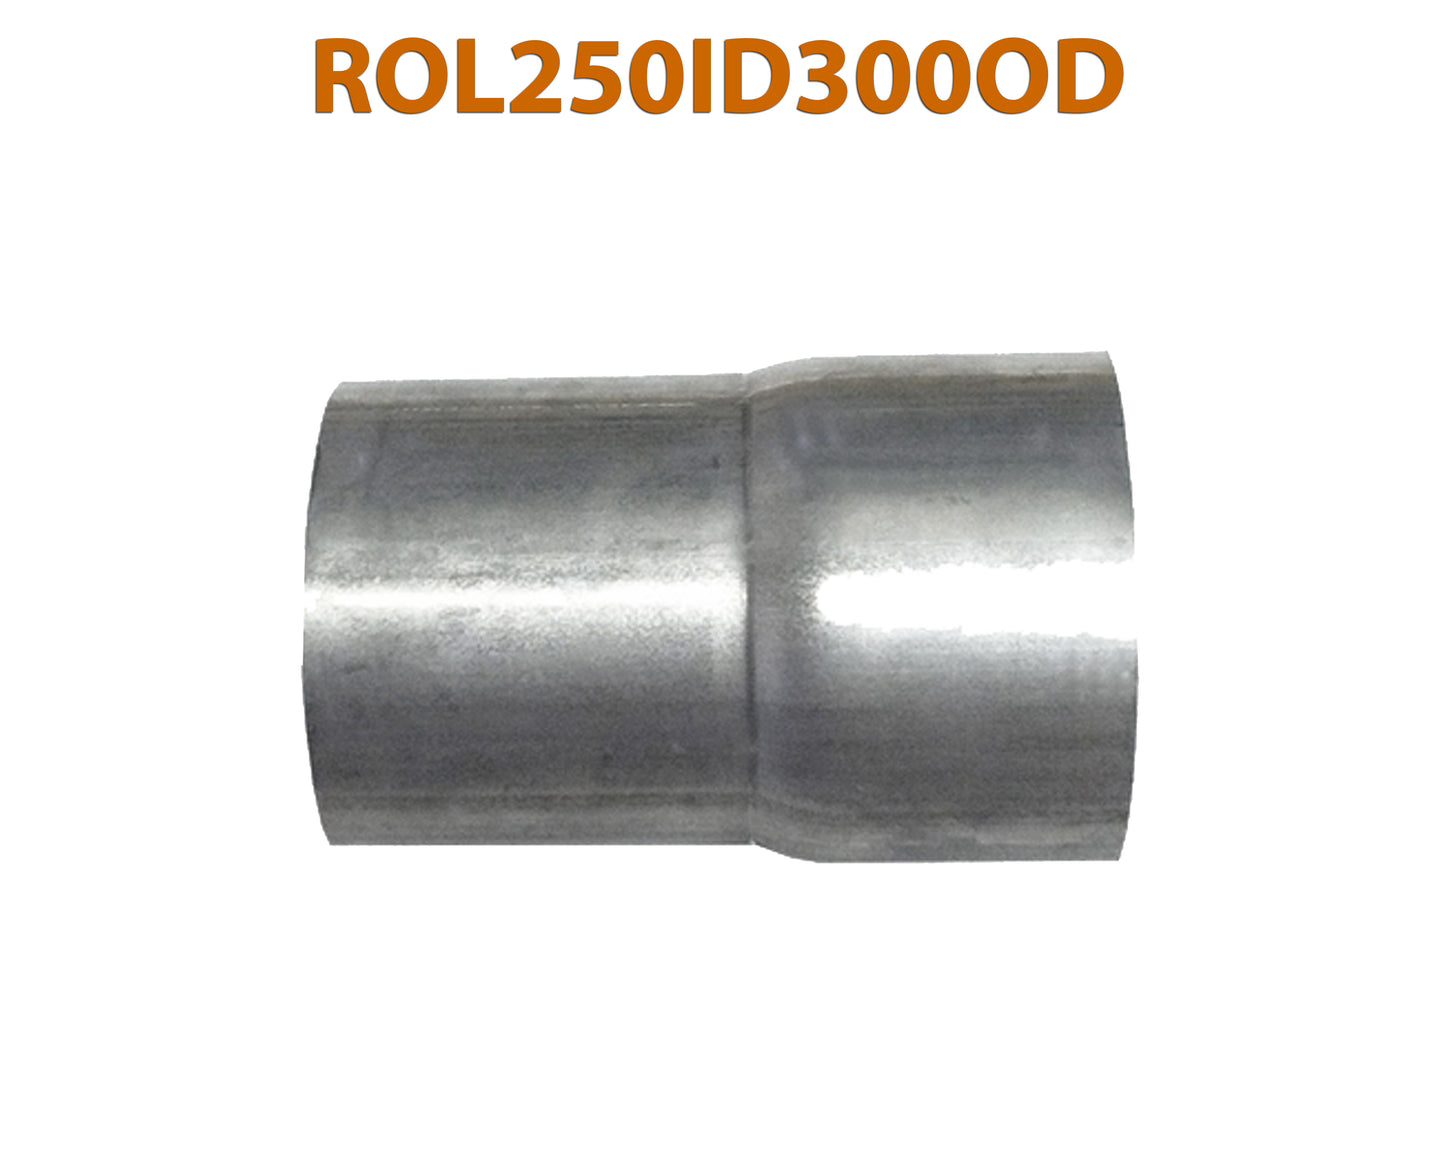 ROL250ID300OD 548583 2 1/2" ID to 3" OD Universal Exhaust Pipe to Component Adapter Reducer